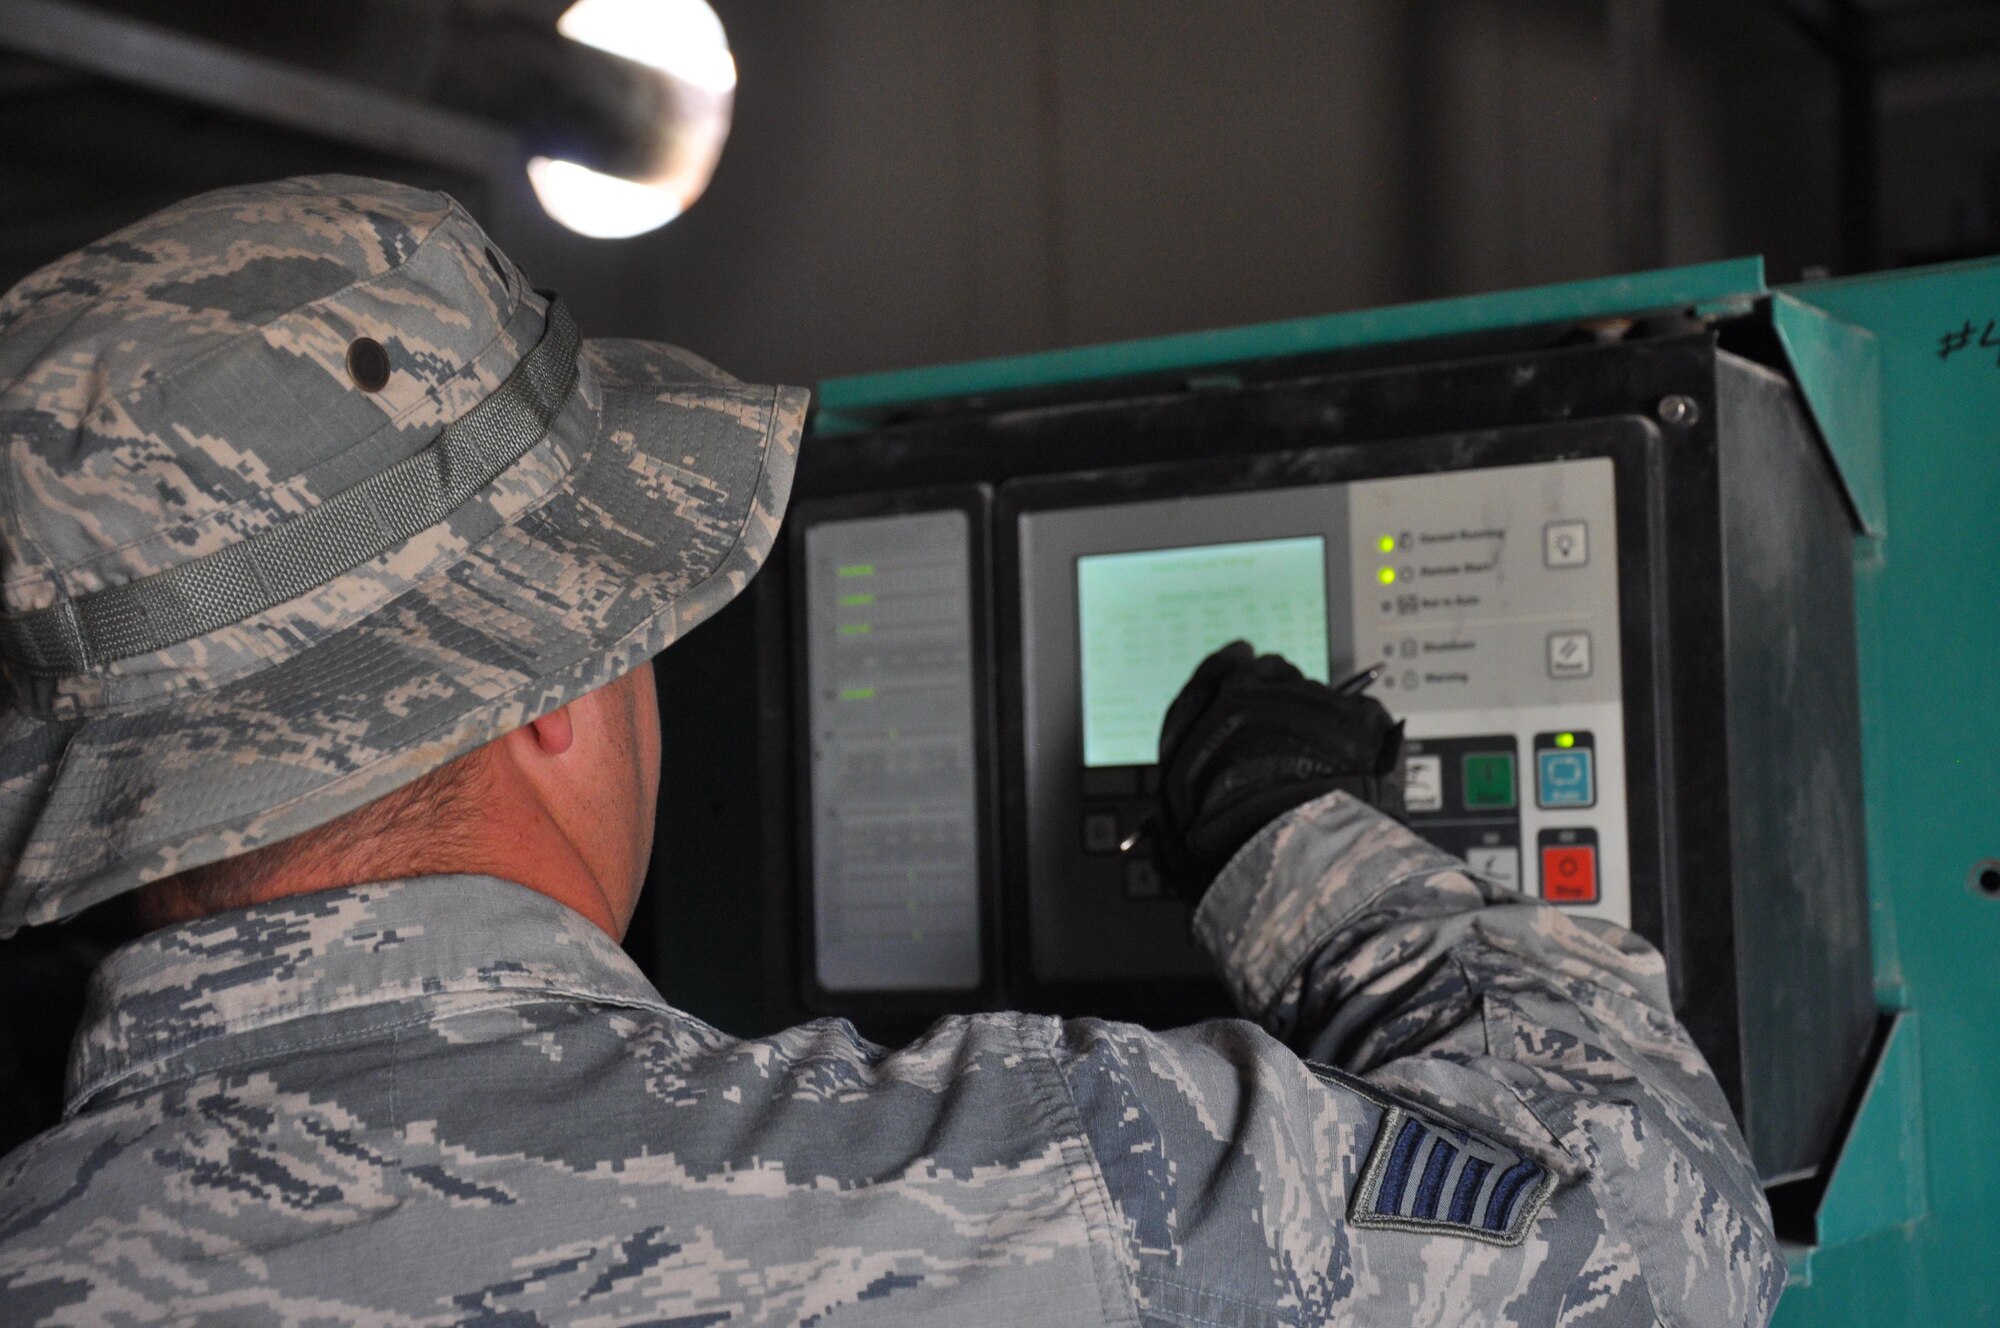 Staff Sgt. Jason D. Clinch, a generator maintenance program manager with the 386th Expeditionary Civil Engineer Squadron, adjusts power generator settings during a preventative maintenance check Wednesday May 10, 2017, at an undisclosed location in Southwest Asia. The power generator serves as a supplement to the host nation electrical grid. Staff Sergeant Clinch is deployed from the 30th Space Wing, Vandenberg Air Force Base, Calif.